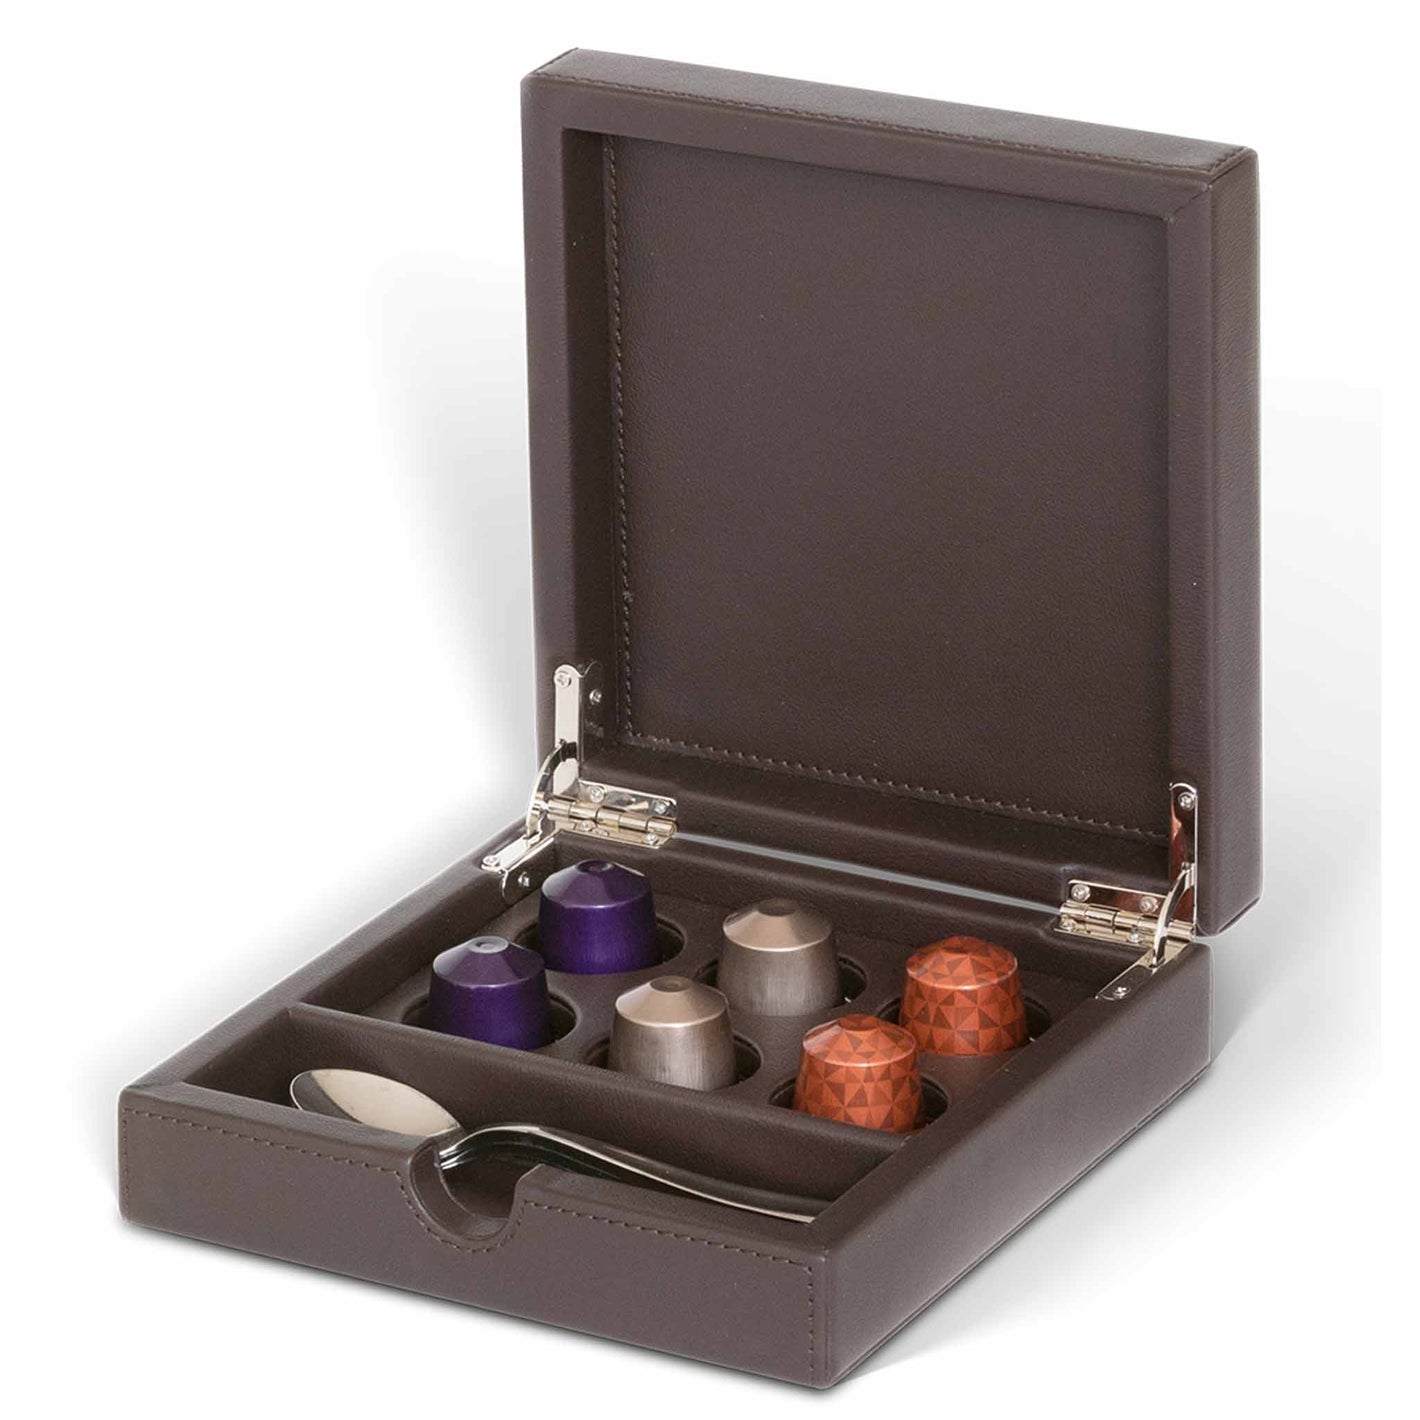 Bentley Yasur PU Leather Condiment Box, Brown (Case of 10)